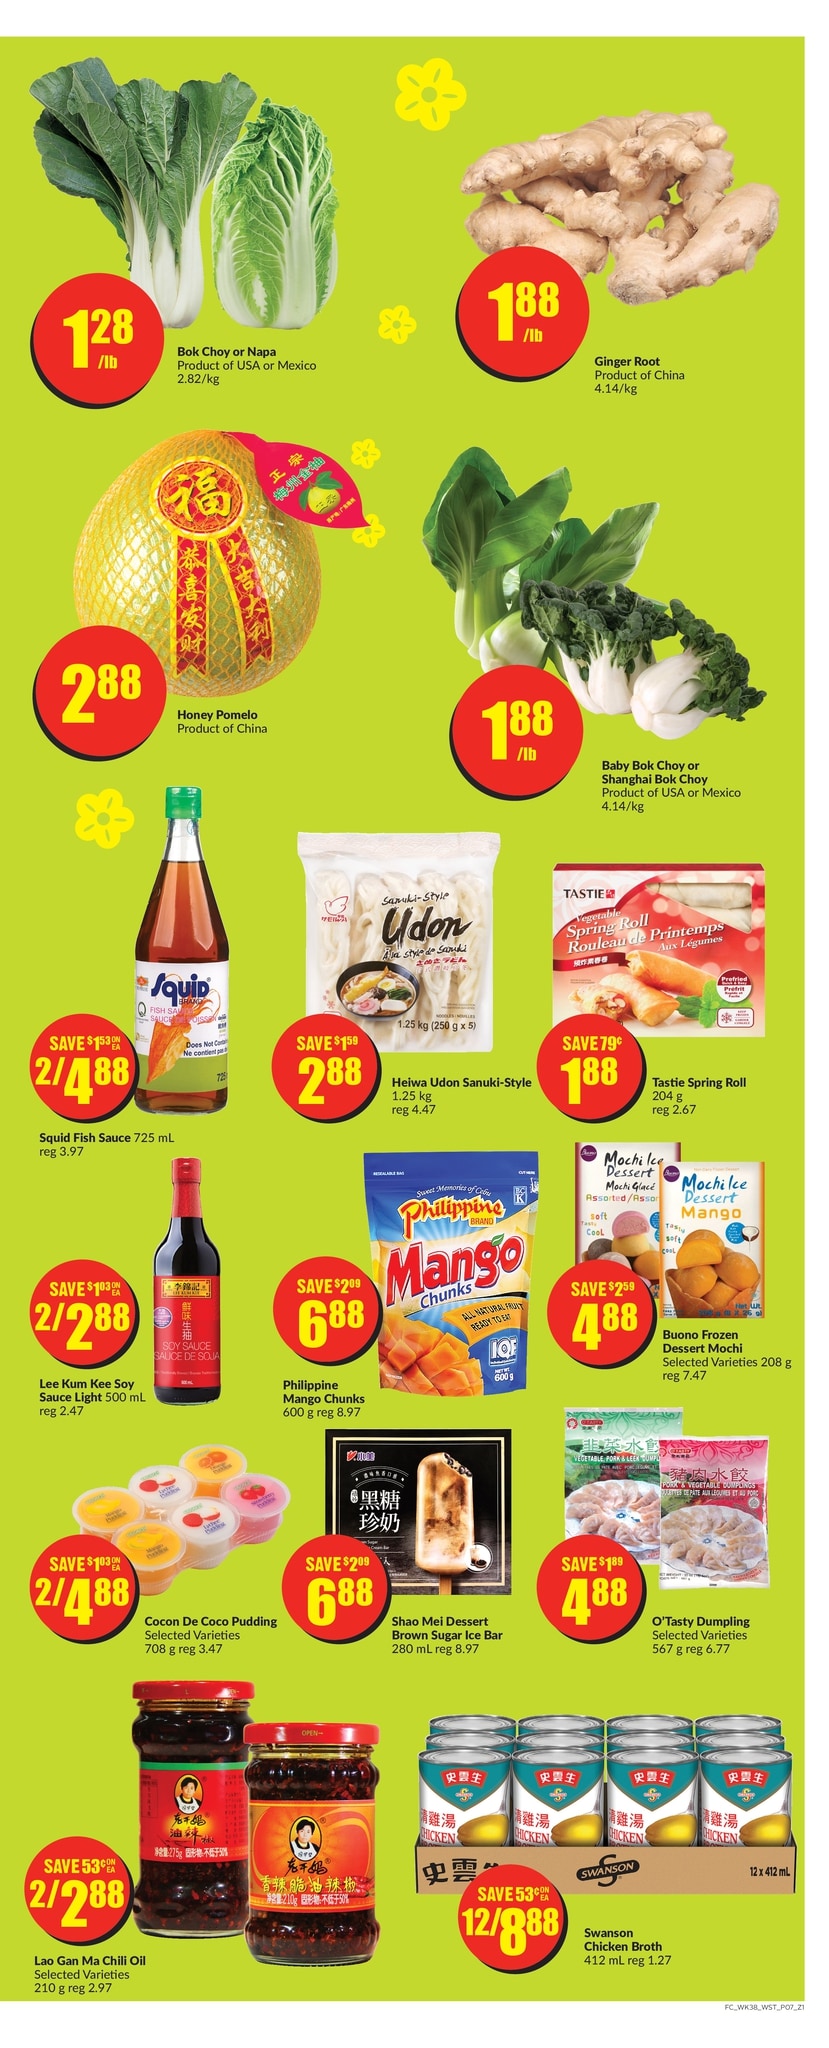 FreshCo British Columbia - Weekly Flyer Specials - Page 8